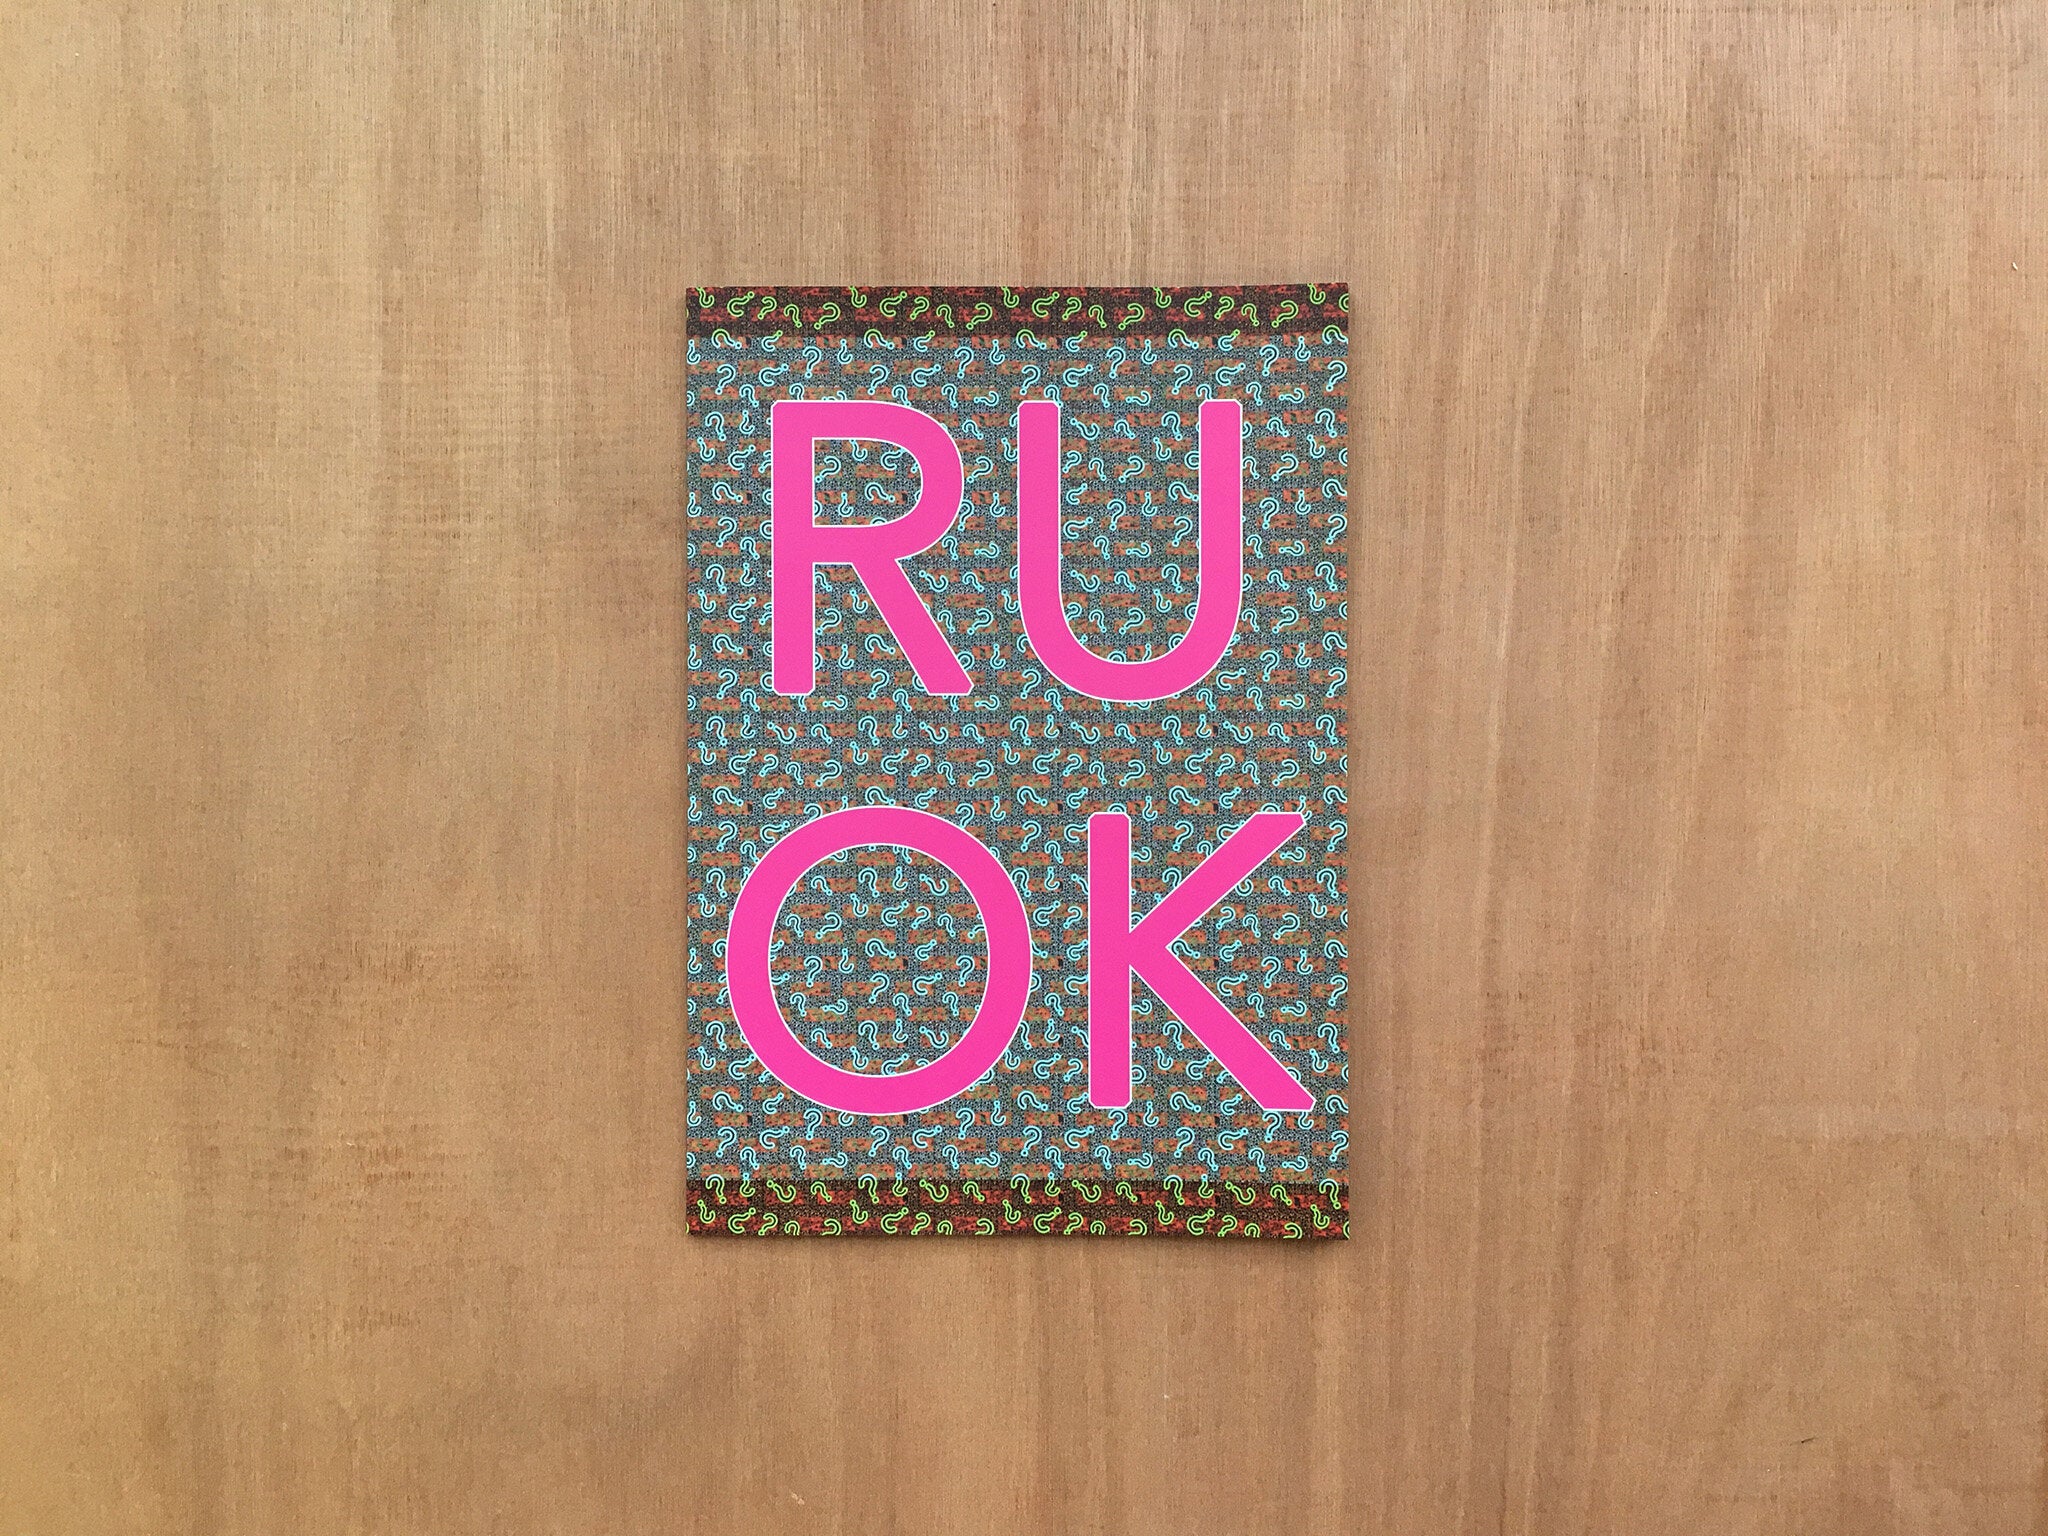 RUOK? by George Lionel Barker and Paddy Gould